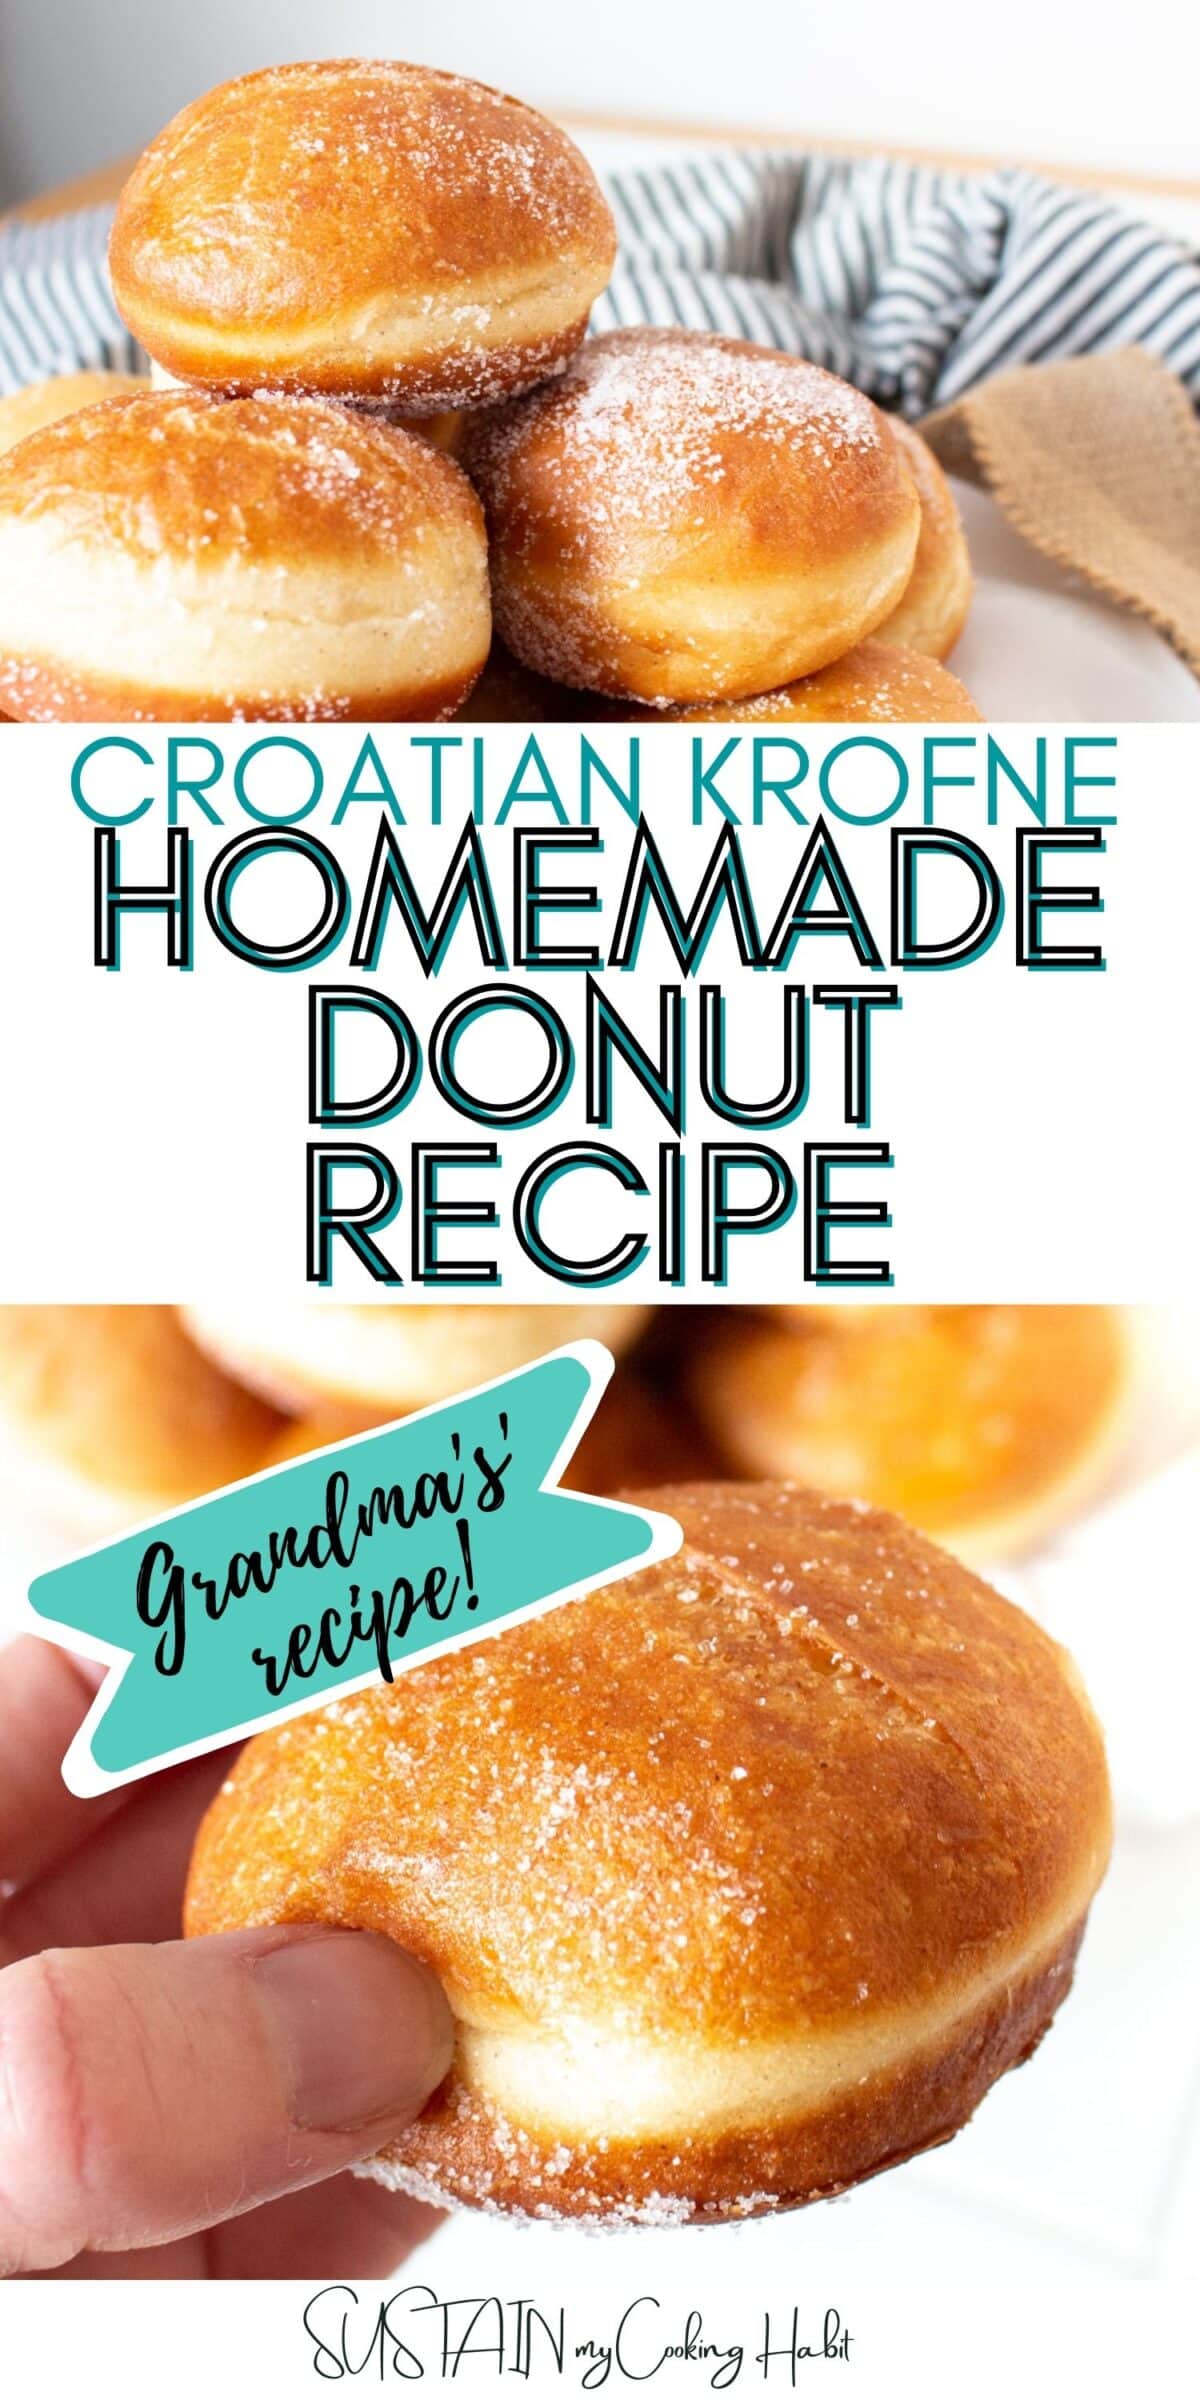 Collage of Croatian krofne donuts with text overlay.